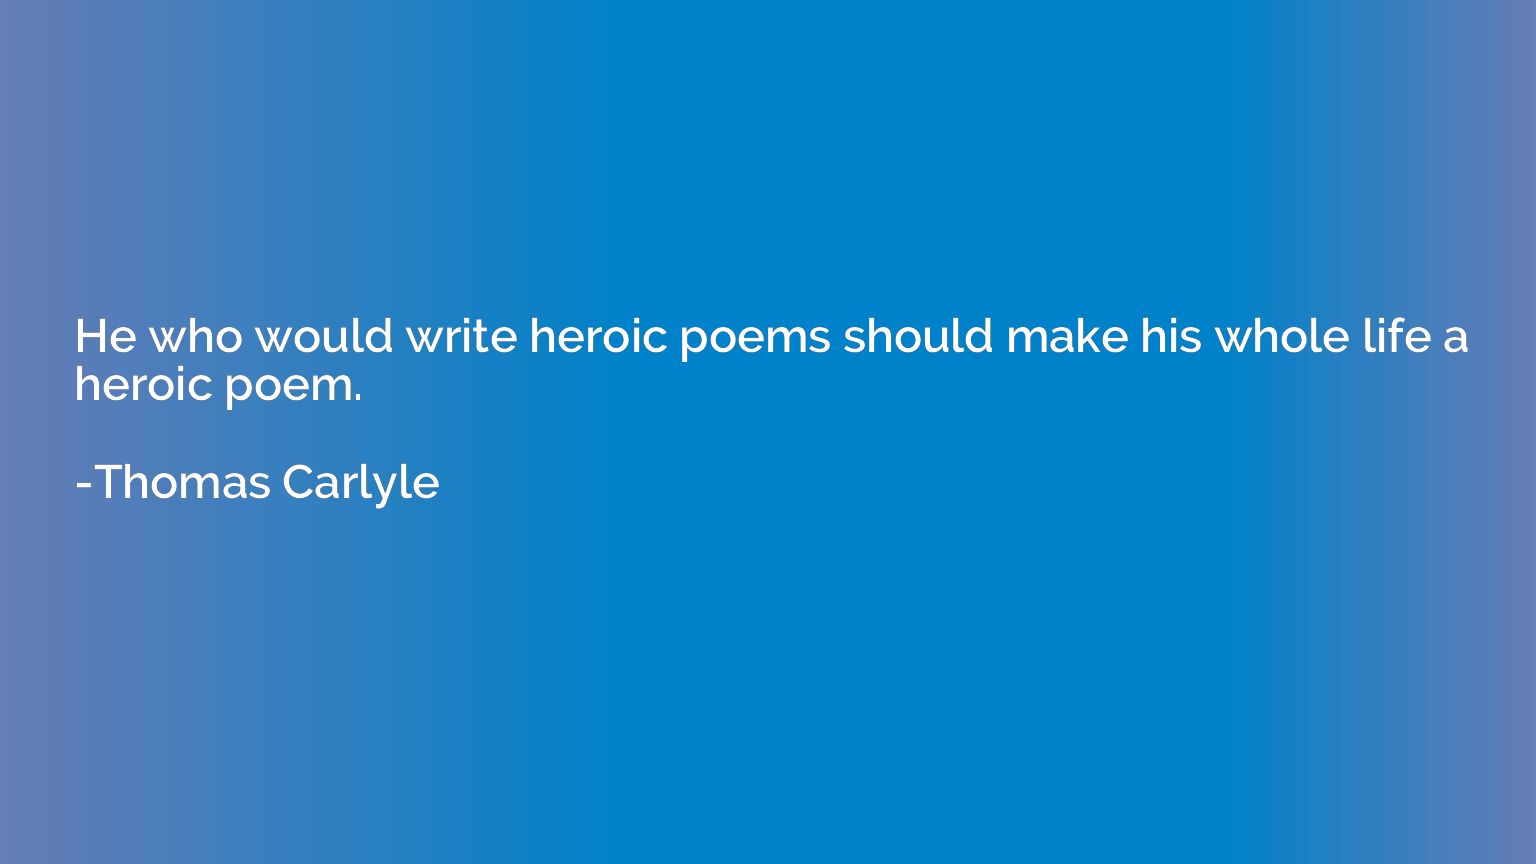 He who would write heroic poems should make his whole life a